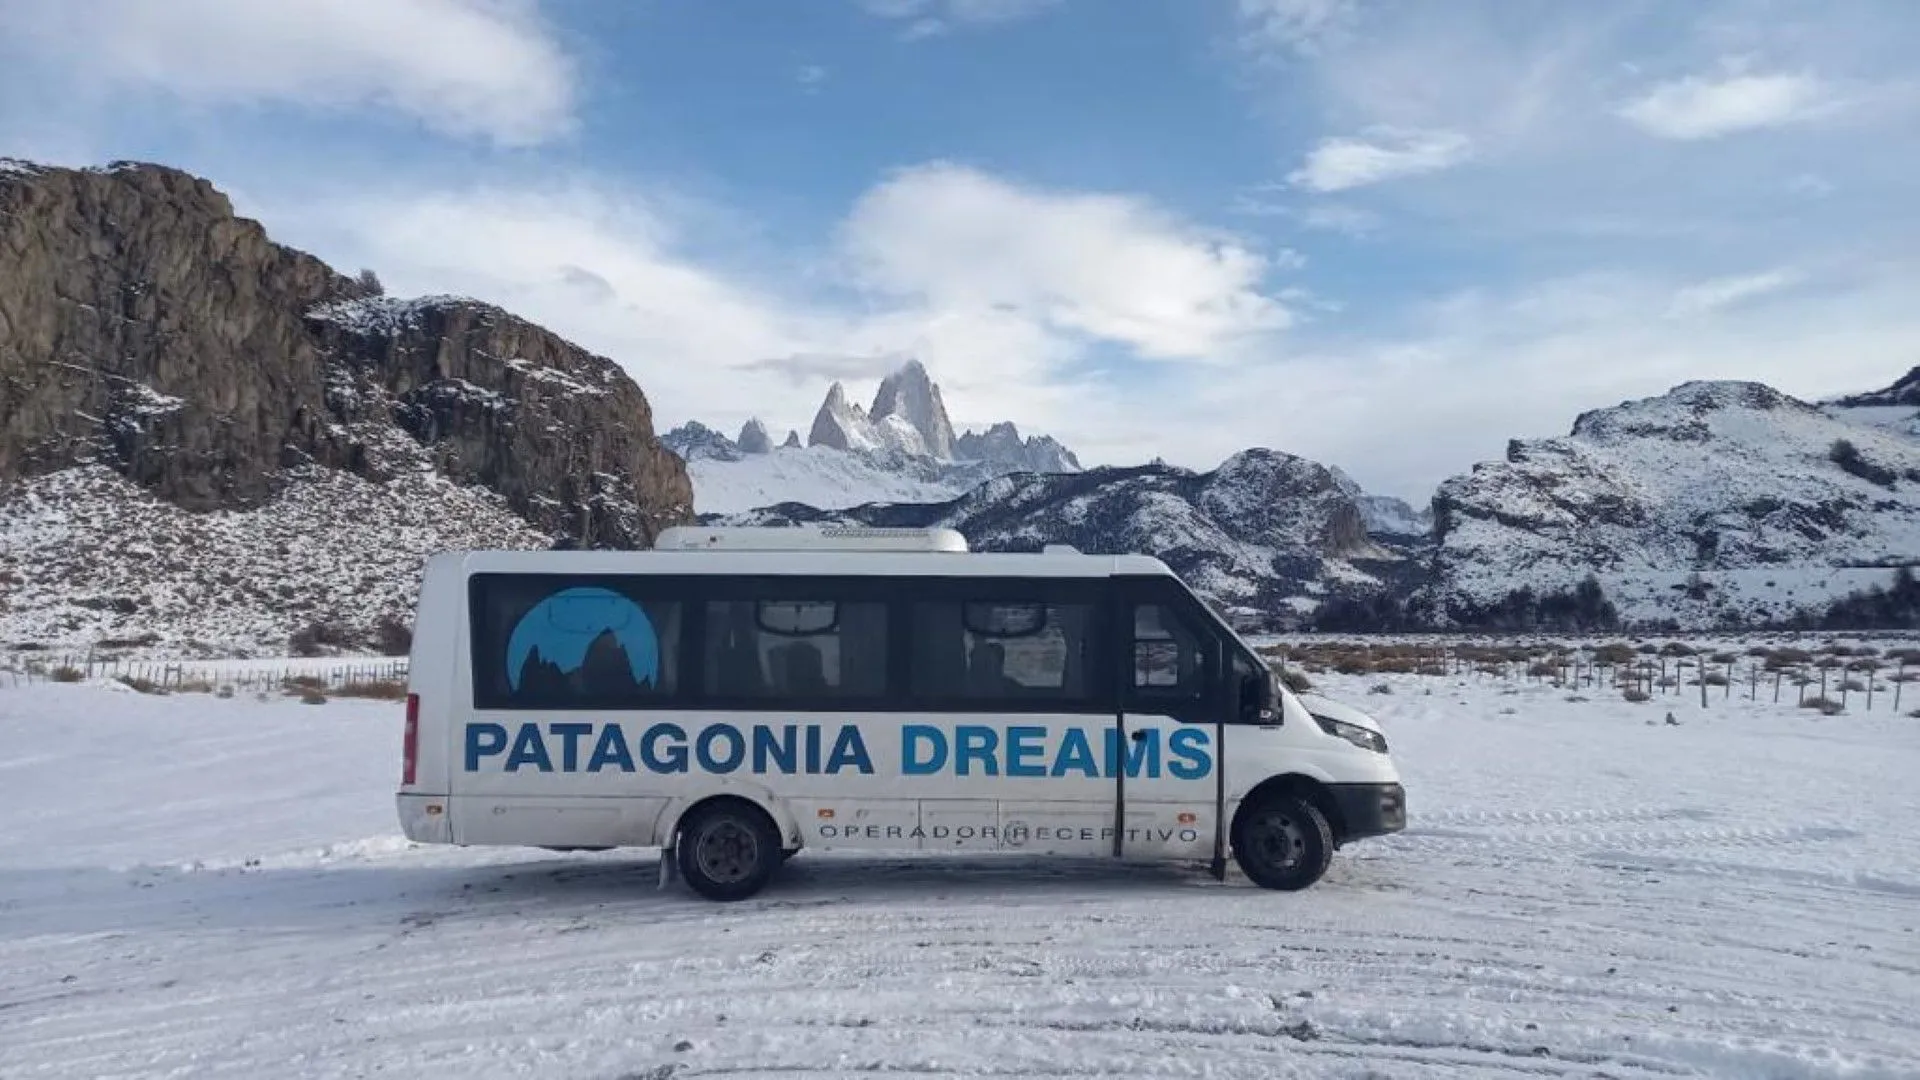 Patagonia Dreams - Operador Receptivo in Argentina, South America | Kayaking & Canoeing,Excursions - Rated 9.1